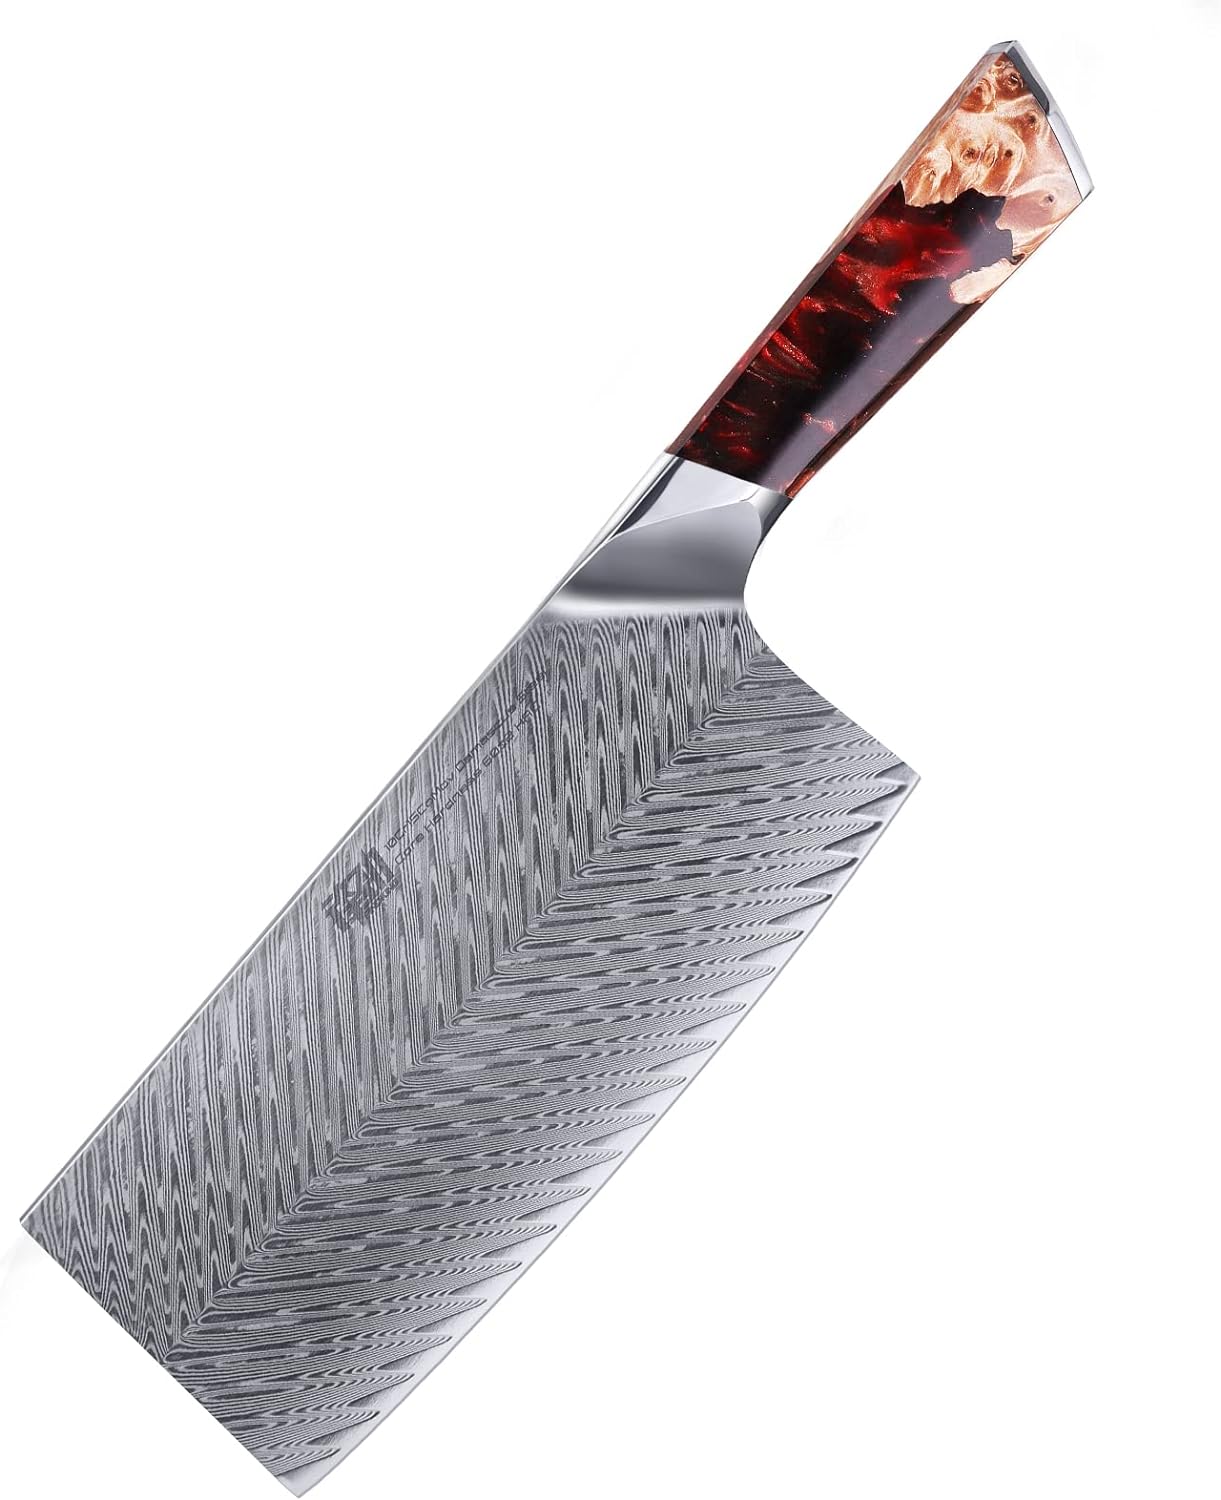 FINDKING Nebula Series Cleaver Knife, Multipurpose Chinese Chef Knife, 10Cr15CoMov Damascus Steel Blade, Resin and Figured Sycamore Handle, Full Tang, 7 Inch, Red, for Meat, Vegetable Shredding